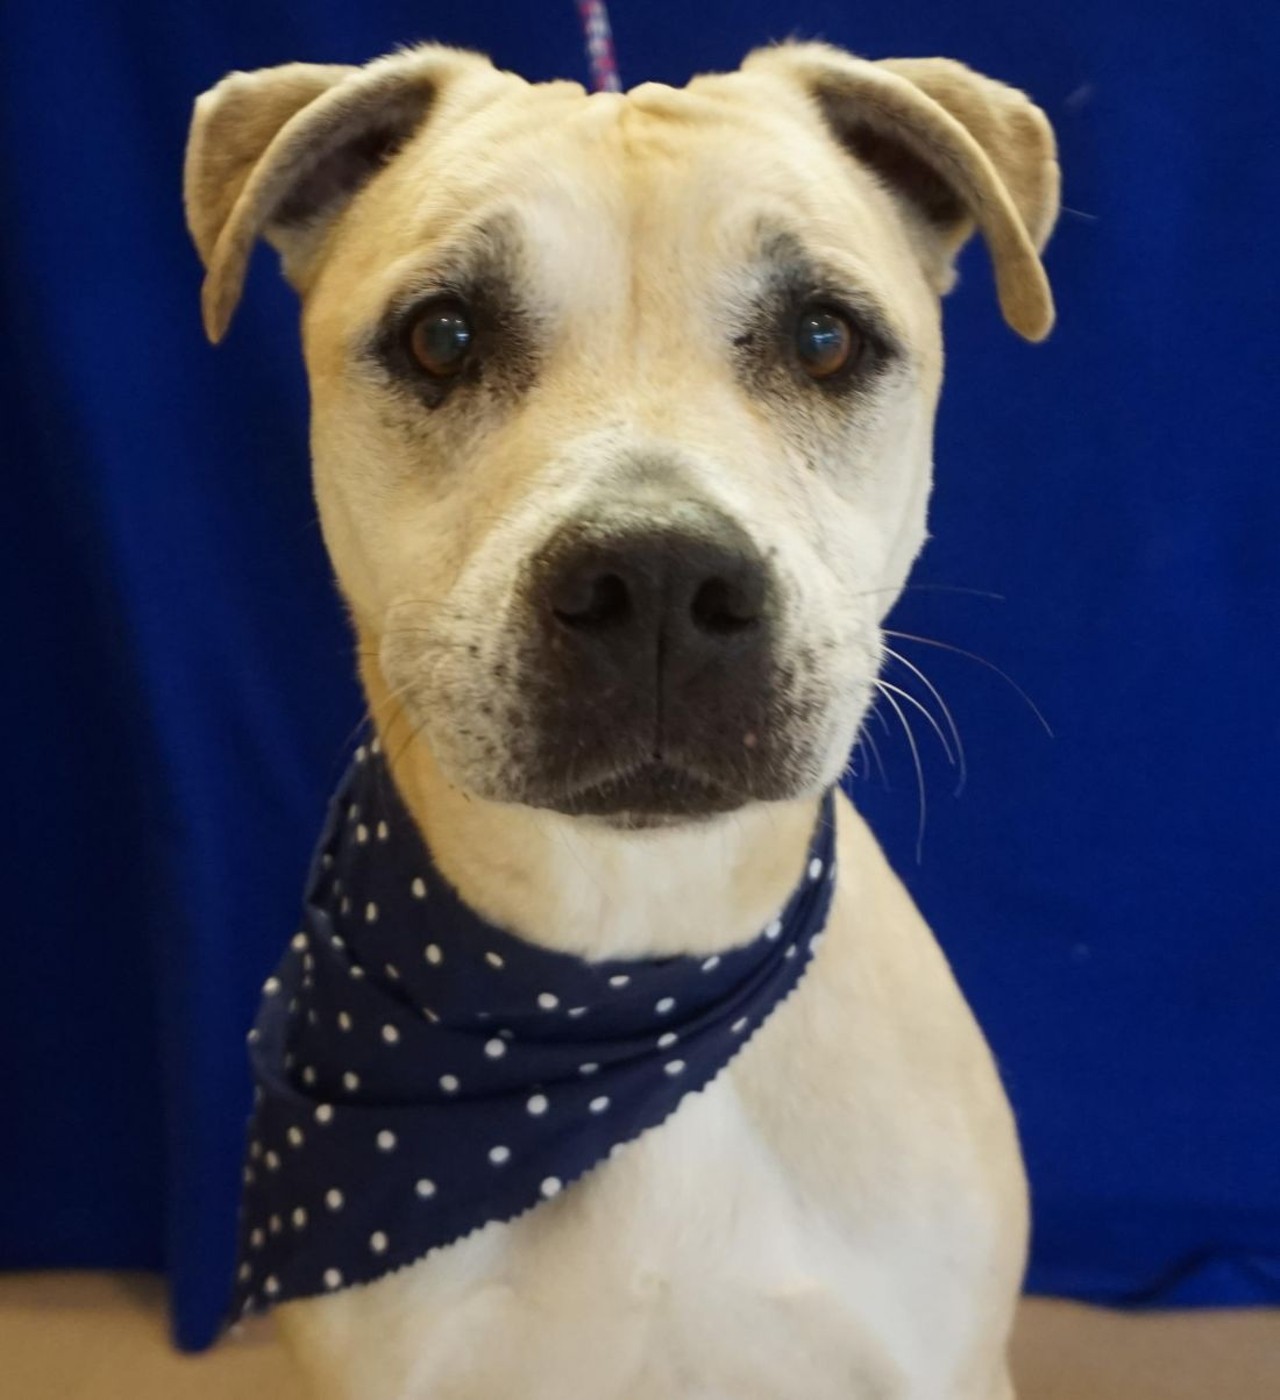 NAME: Kimba
GENDER: Female
BREED: Shar Pei-Pit Bull Terrier mix
AGE: 9 years
WEIGHT: 61 pounds
SPECIAL CONSIDERATIONS: Children may startle her
REASON I CAME TO MHS: Owner fell ill
LOCATION: Petco of Sterling Heights
ID NUMBER: 862531